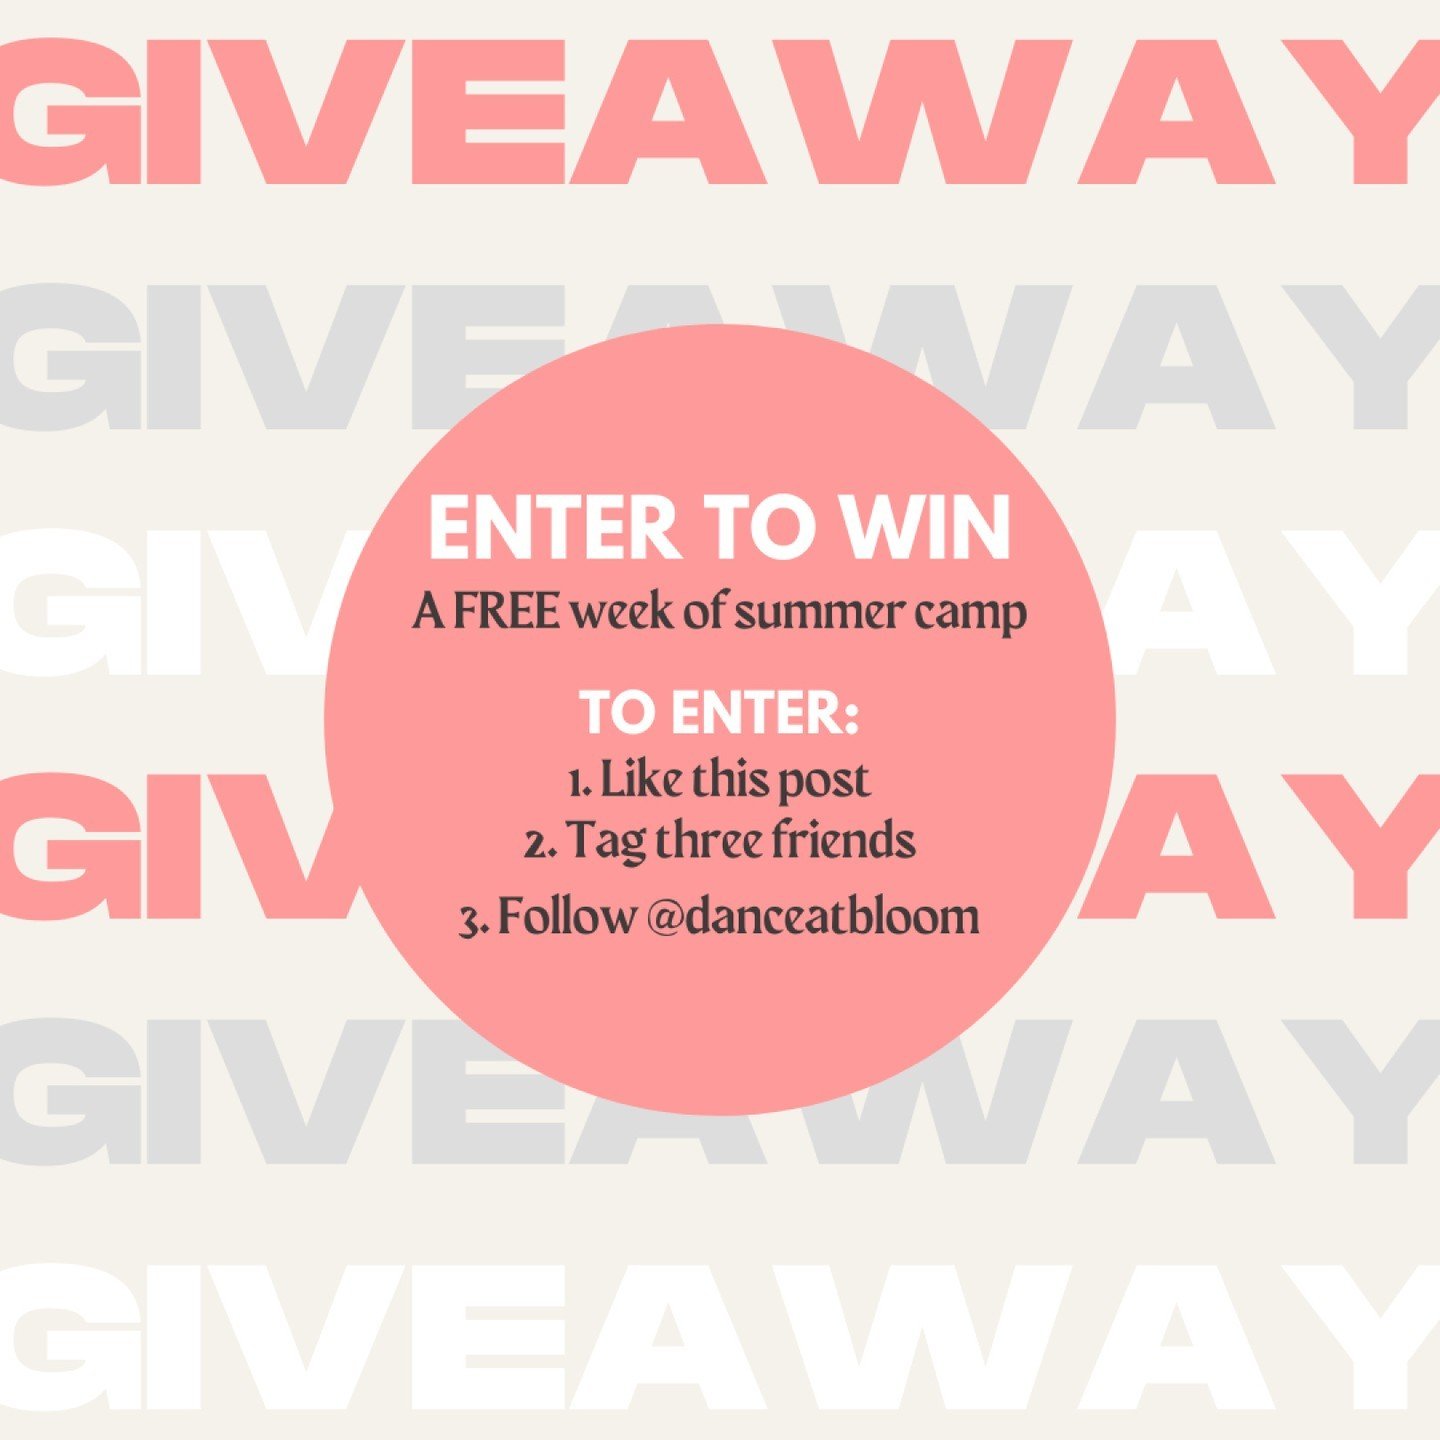 💫SUMMER CAMP GIVEAWAY! 💫

✨ To enter ✨
1. Like this post
2. Tag three friends
3. Follow us @danceatbloom
4. Share this post to your stories and tag @danceatbloom for an extra entry!

Giveaway closes on 4/25/2024 at 7:00PM CST. Good luck to all part